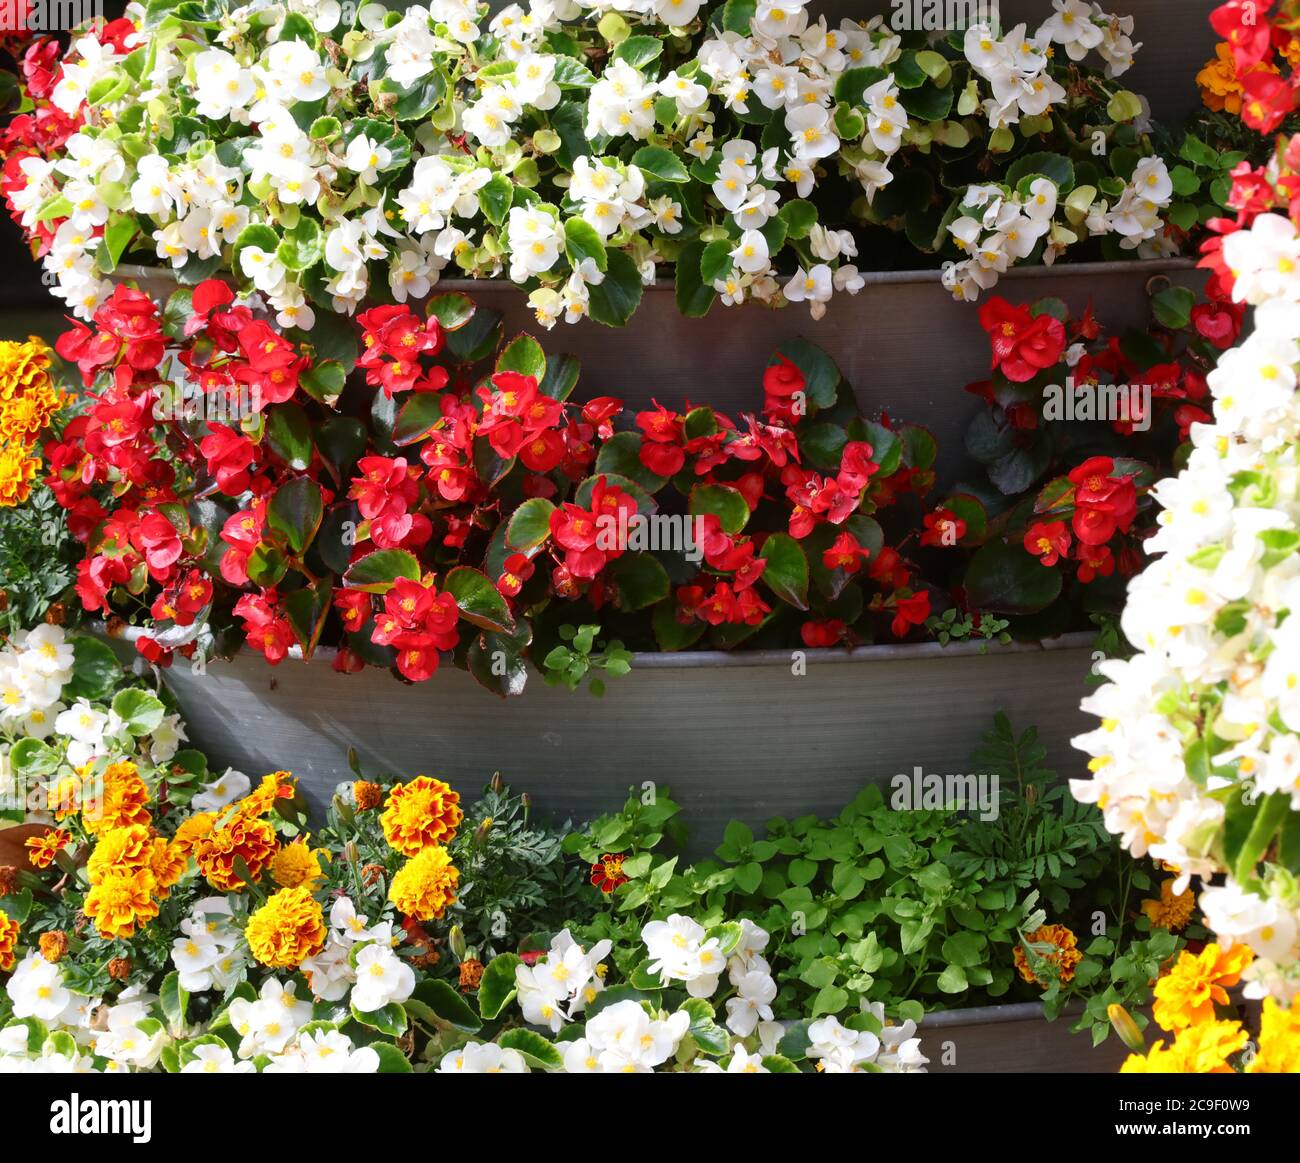 begonias and other flowers in the large vertical flowerbed to decorate the city Stock Photo